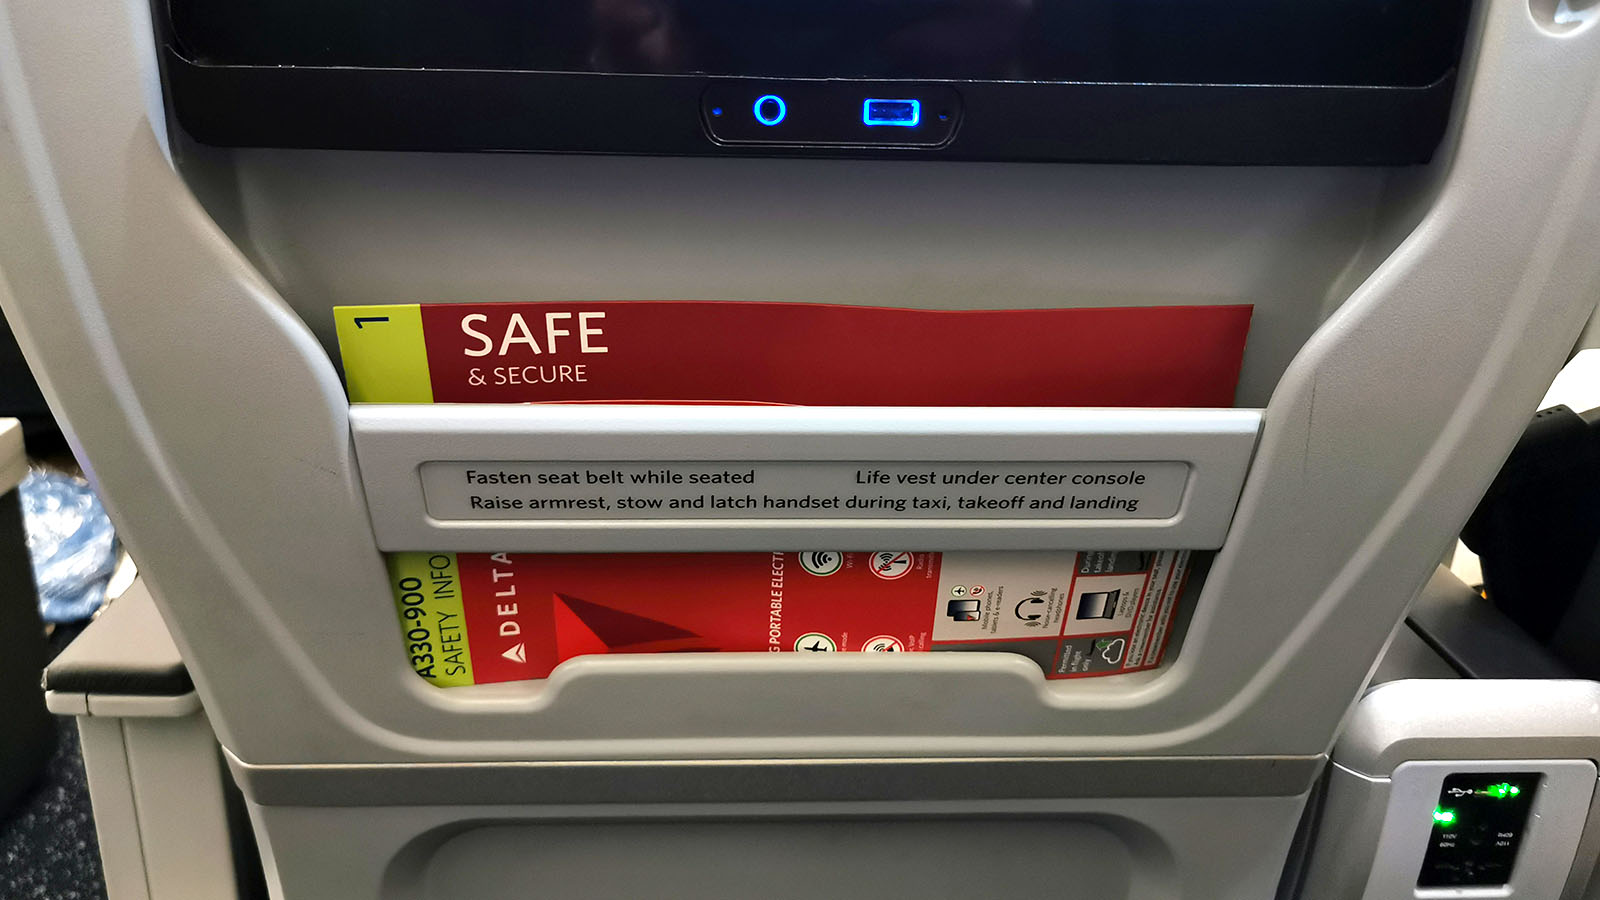 Reading storage in Delta A330-900neo Comfort+